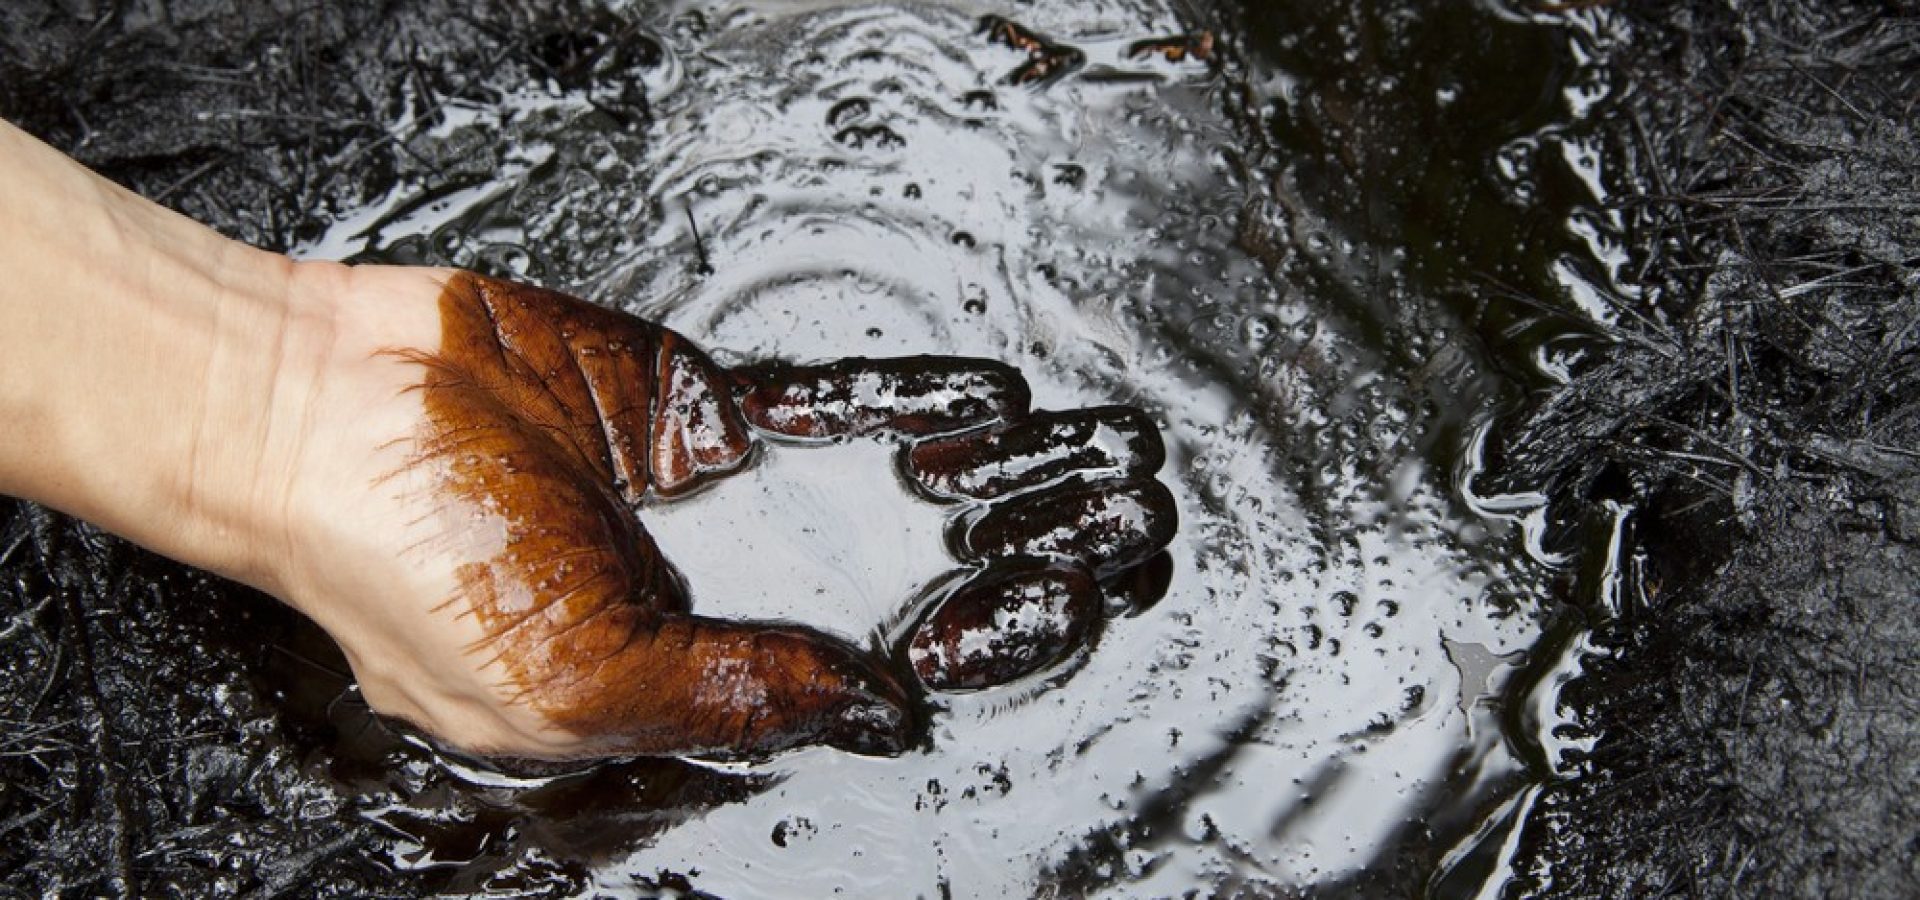 Wibest – Petroleum and Oil: Crude oil spilled a hand touching its surface.